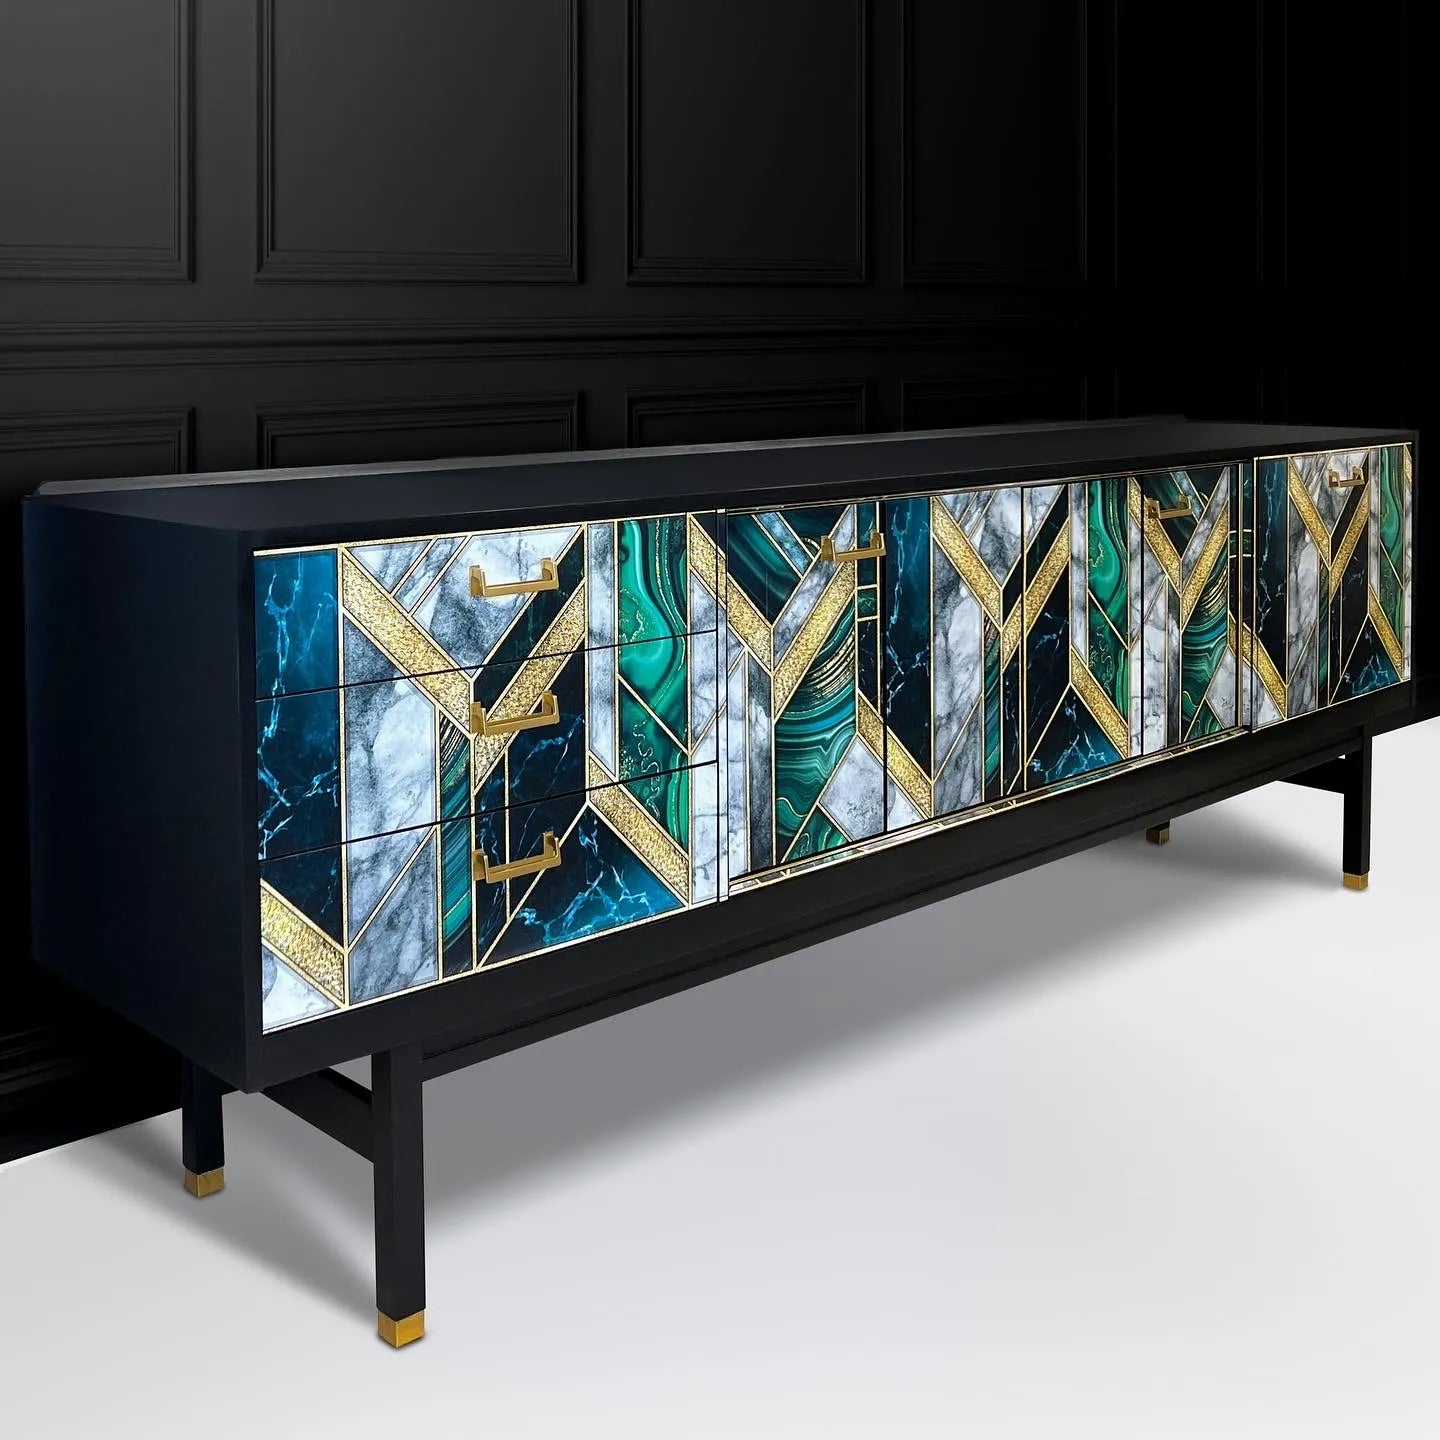 G Plan Extra Long Sideboard Commission Booking Deposit